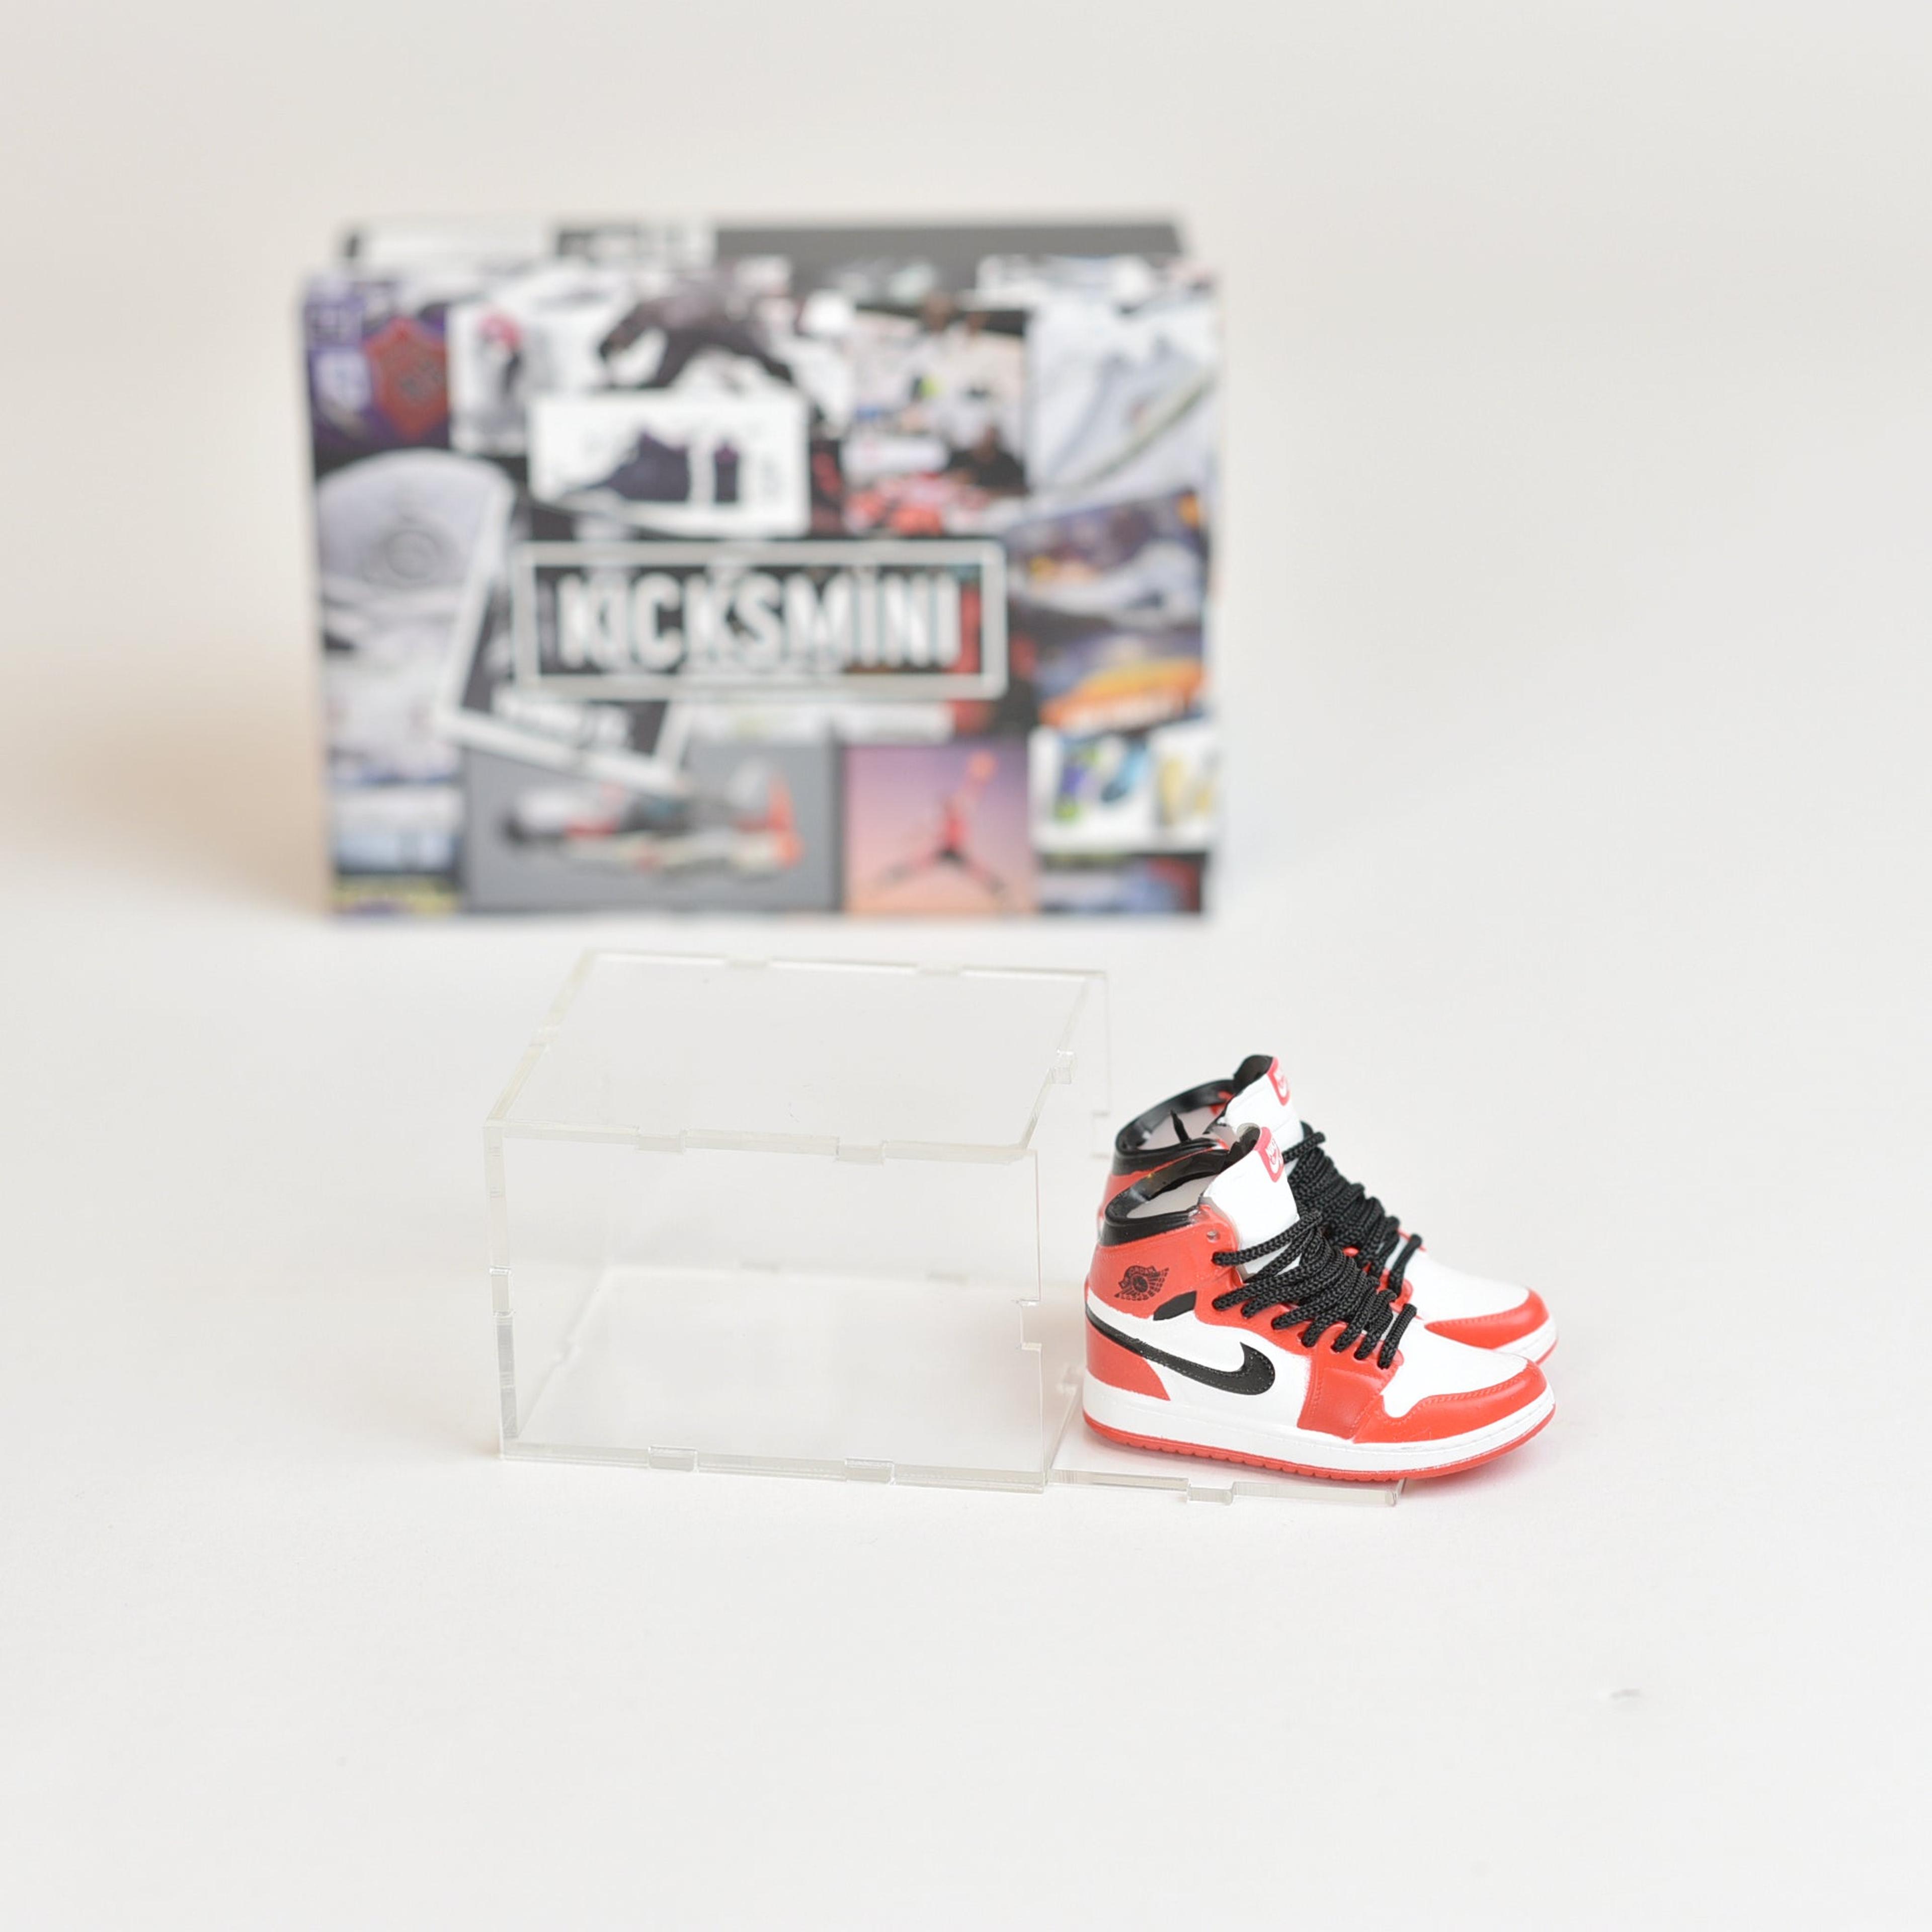 Alternate View 32 of AJ1 Mini Sneakers Collection with Display Case